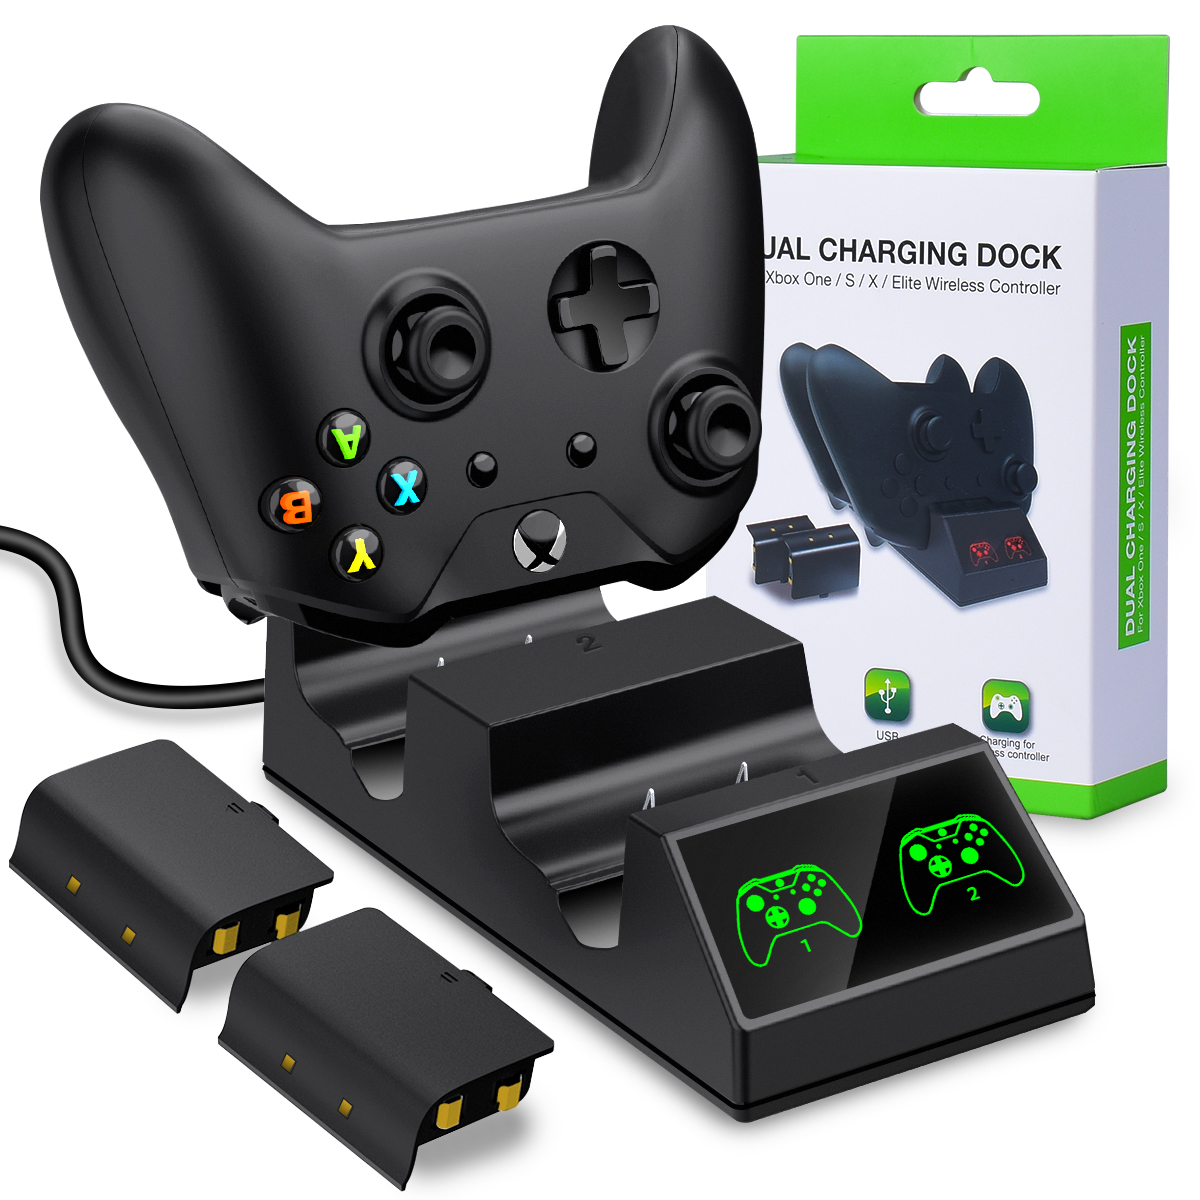 Vogek Xbox One Controller Battery Pack 2 x 2200mAh Rechargeable Battery with USB Charging Cable and Charger Kit for Xbox One/S/X/Elite Wireless Controller 